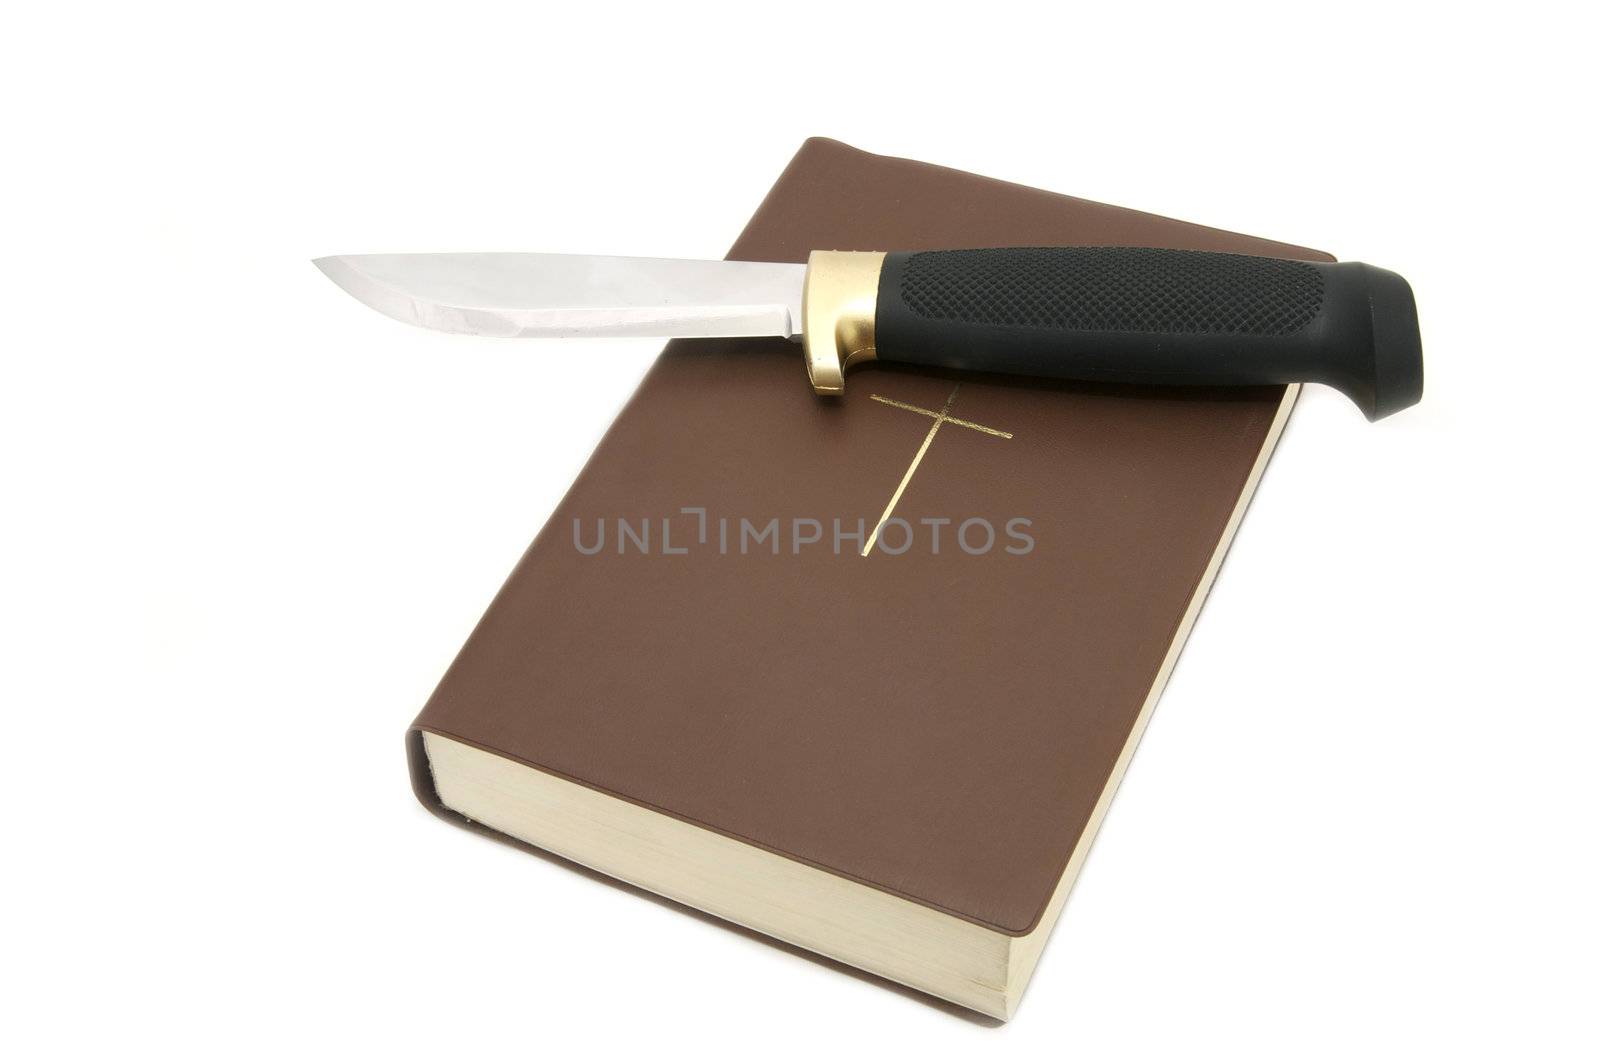 Bible and a knife on a white background